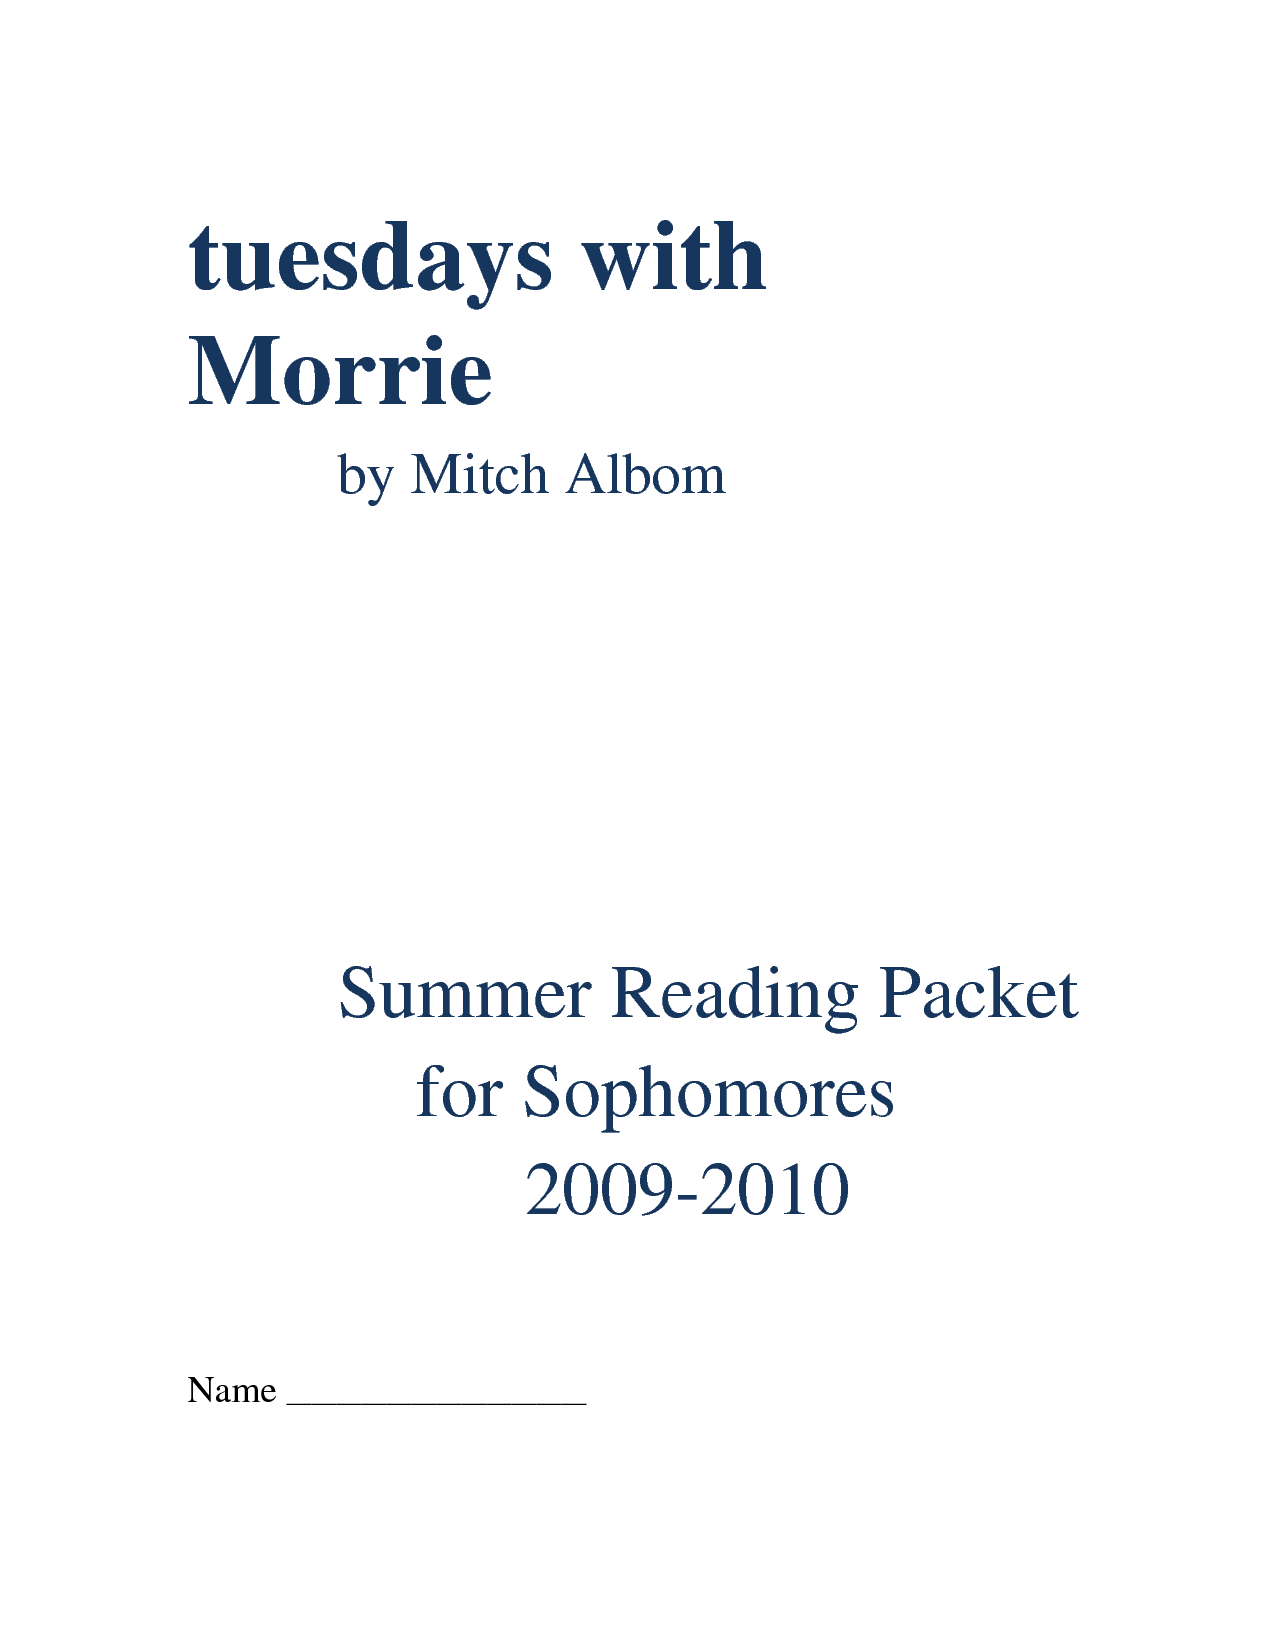 Tuesdays With Morrie Quotes By Chapter. QuotesGram